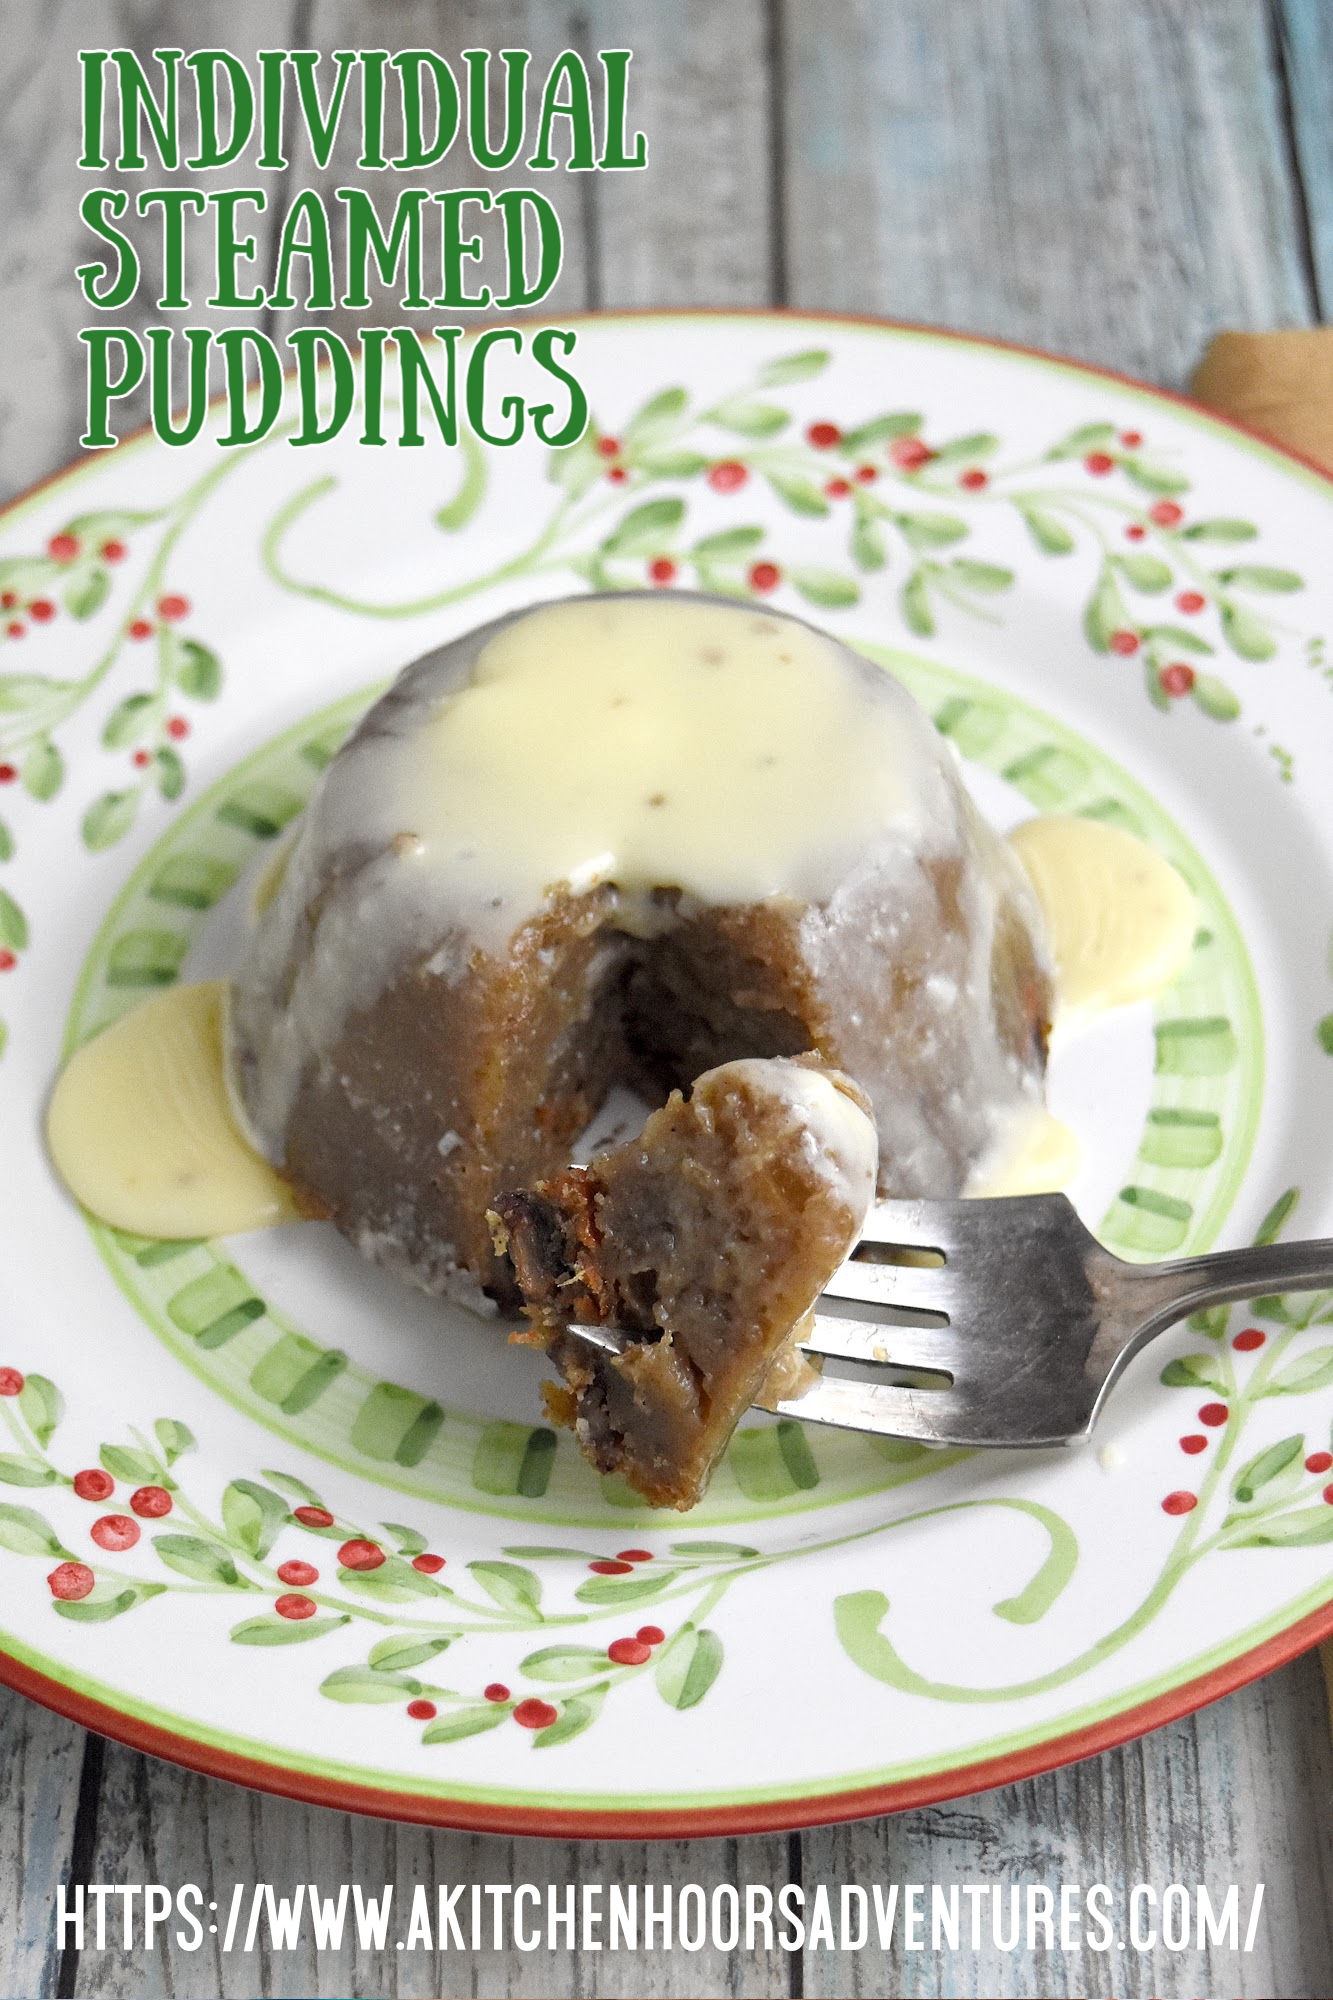 Individual Steamed Puddings are a twist on a traditional European steamed Christmas pudding.  Baked in the oven in a bain marie, or water bath, they are moist, delicious, and full of old-world holiday flavors. #ChristmasSweetsWeek #steamedpudding #Christmaspudding #easysteamedpudding